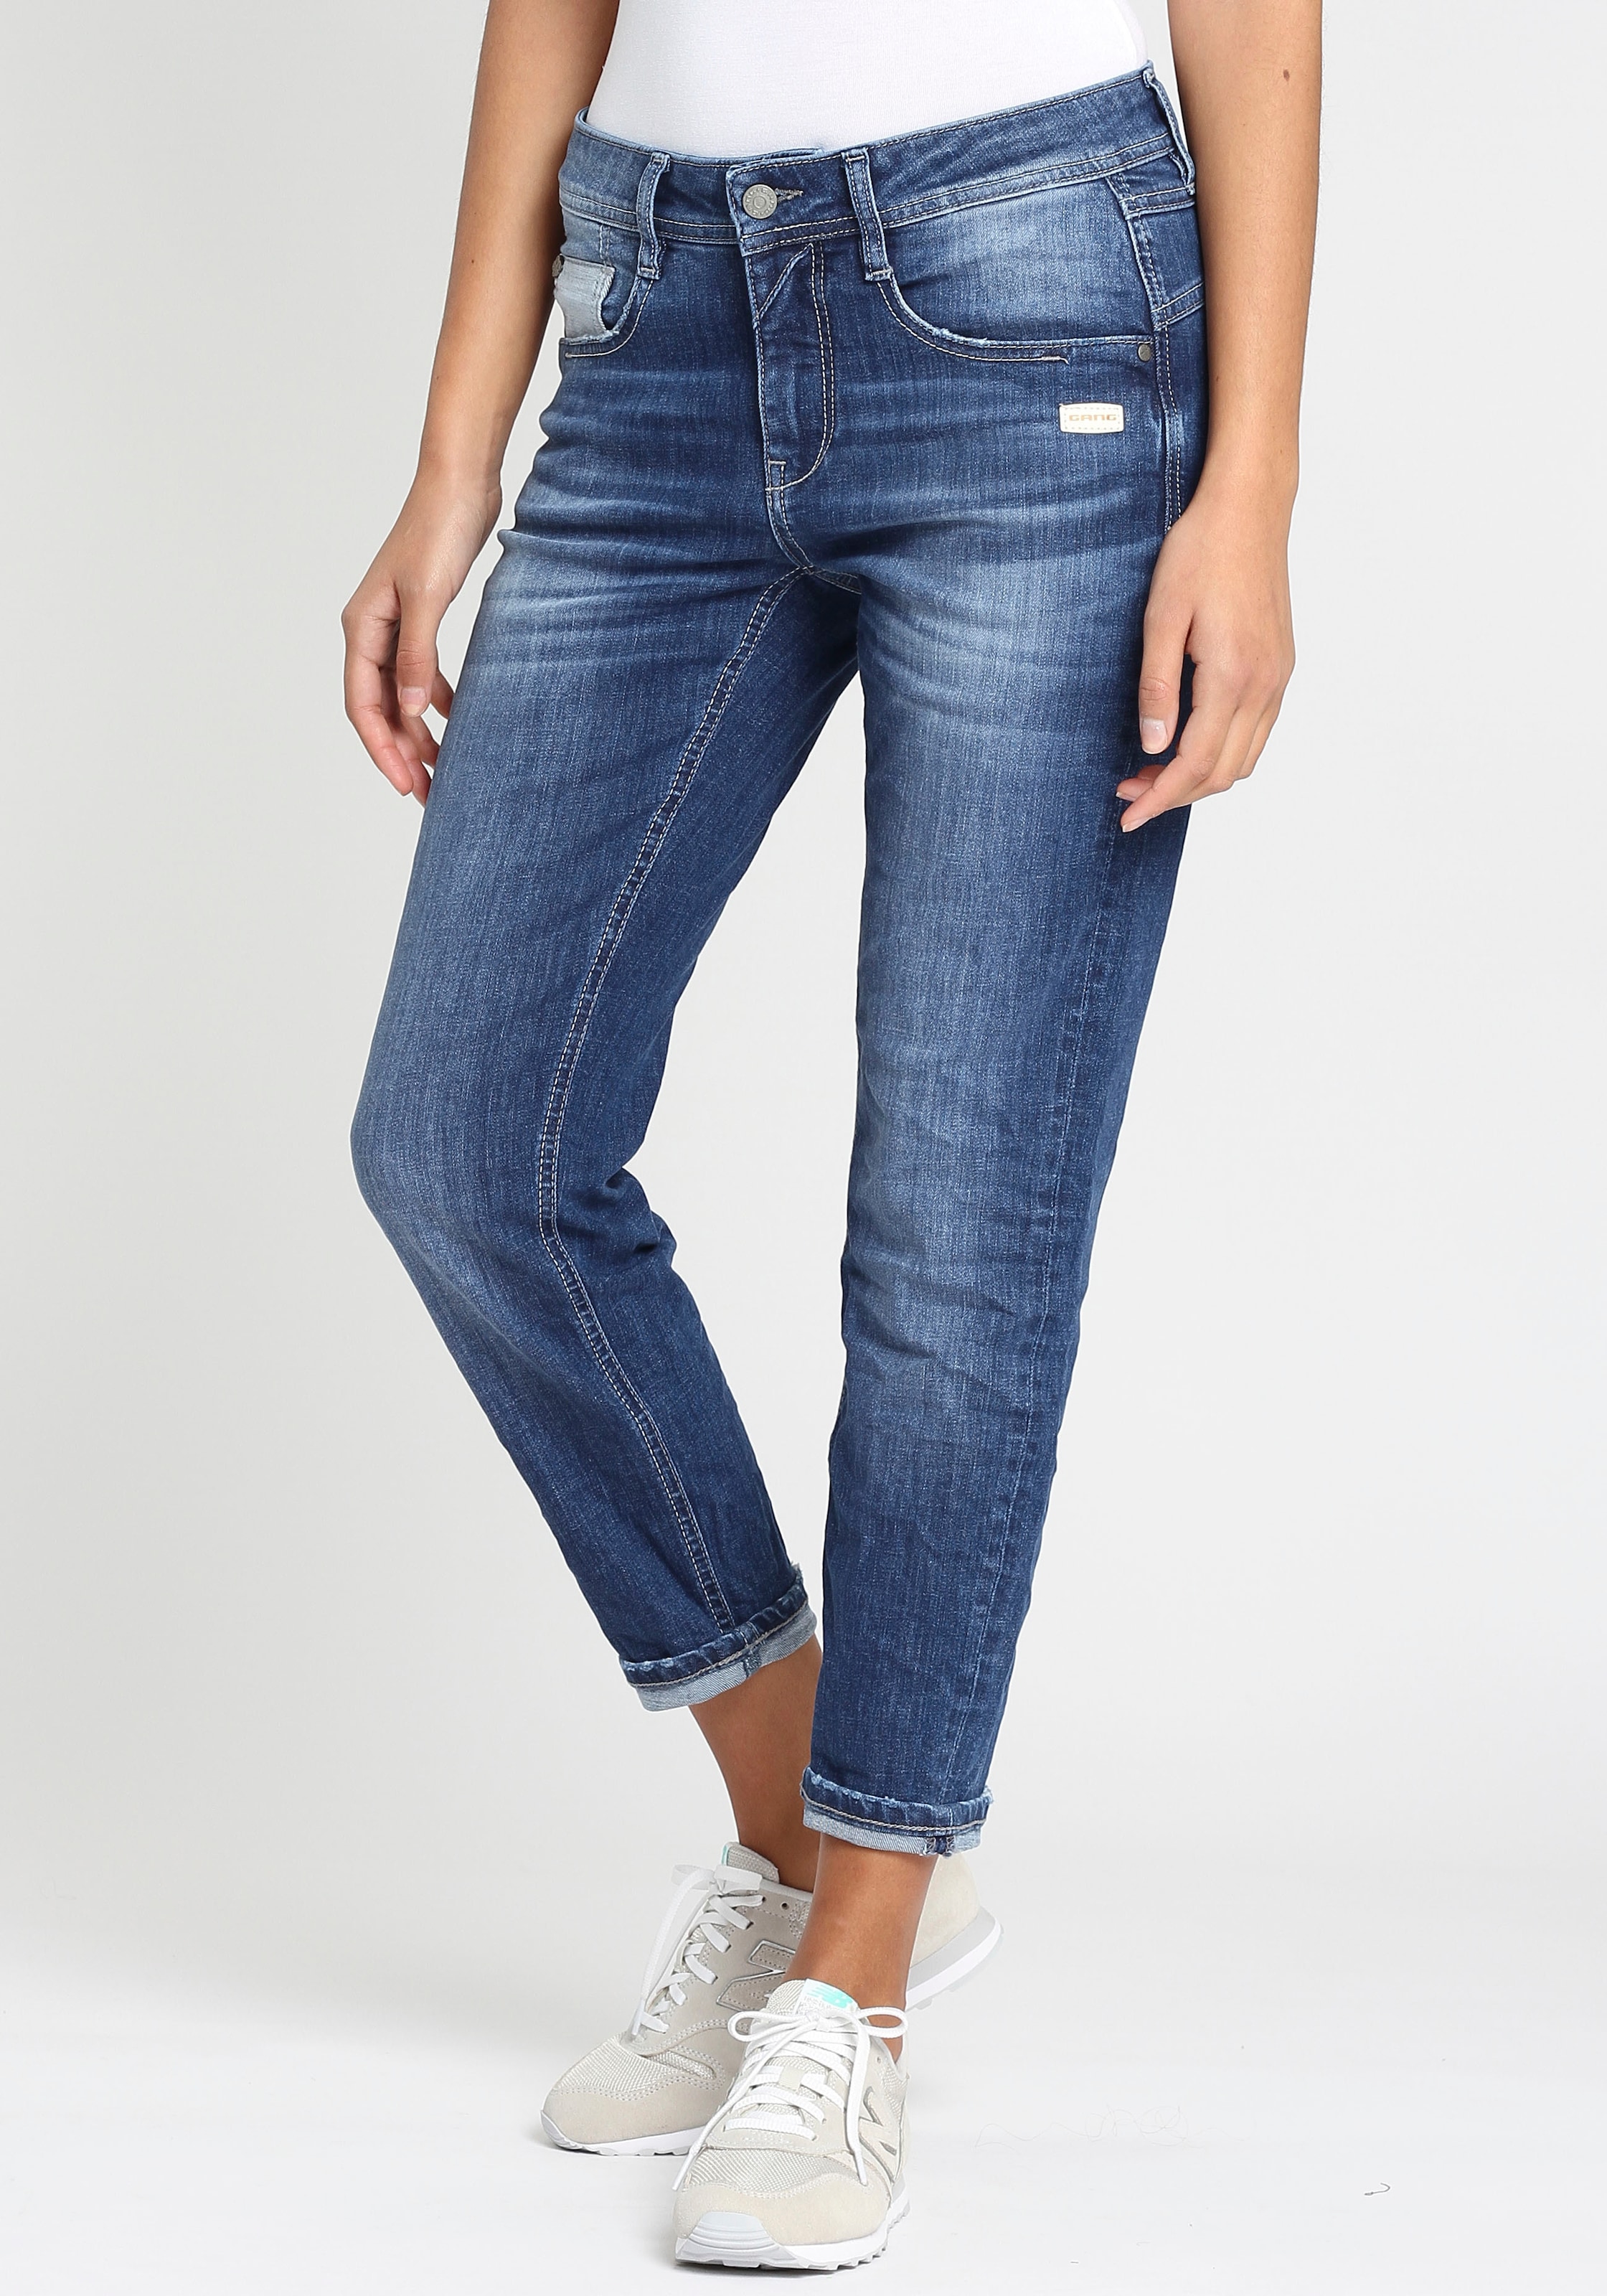 GANG »94AMELIE kaufen | Relax-fit-Jeans BAUR CROPPED«